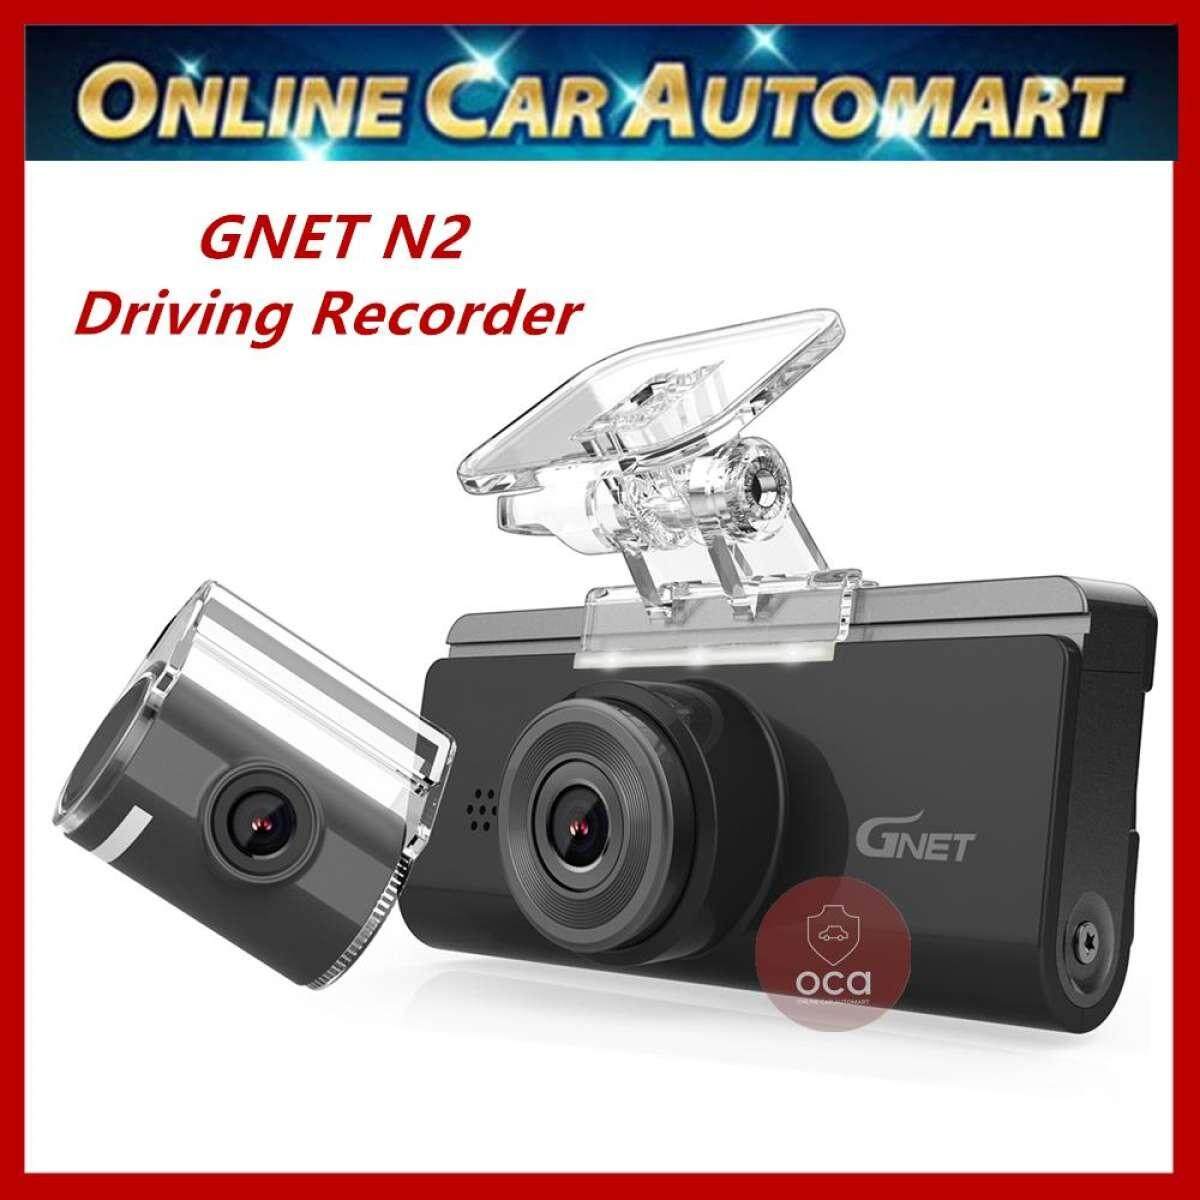 GNET N2 DVR DRIVING RECORDER 1080PNIGHT VISION DASH CAM HIGH QUALITY FRONT & REAR VIEW FULL HD RECORDINGS